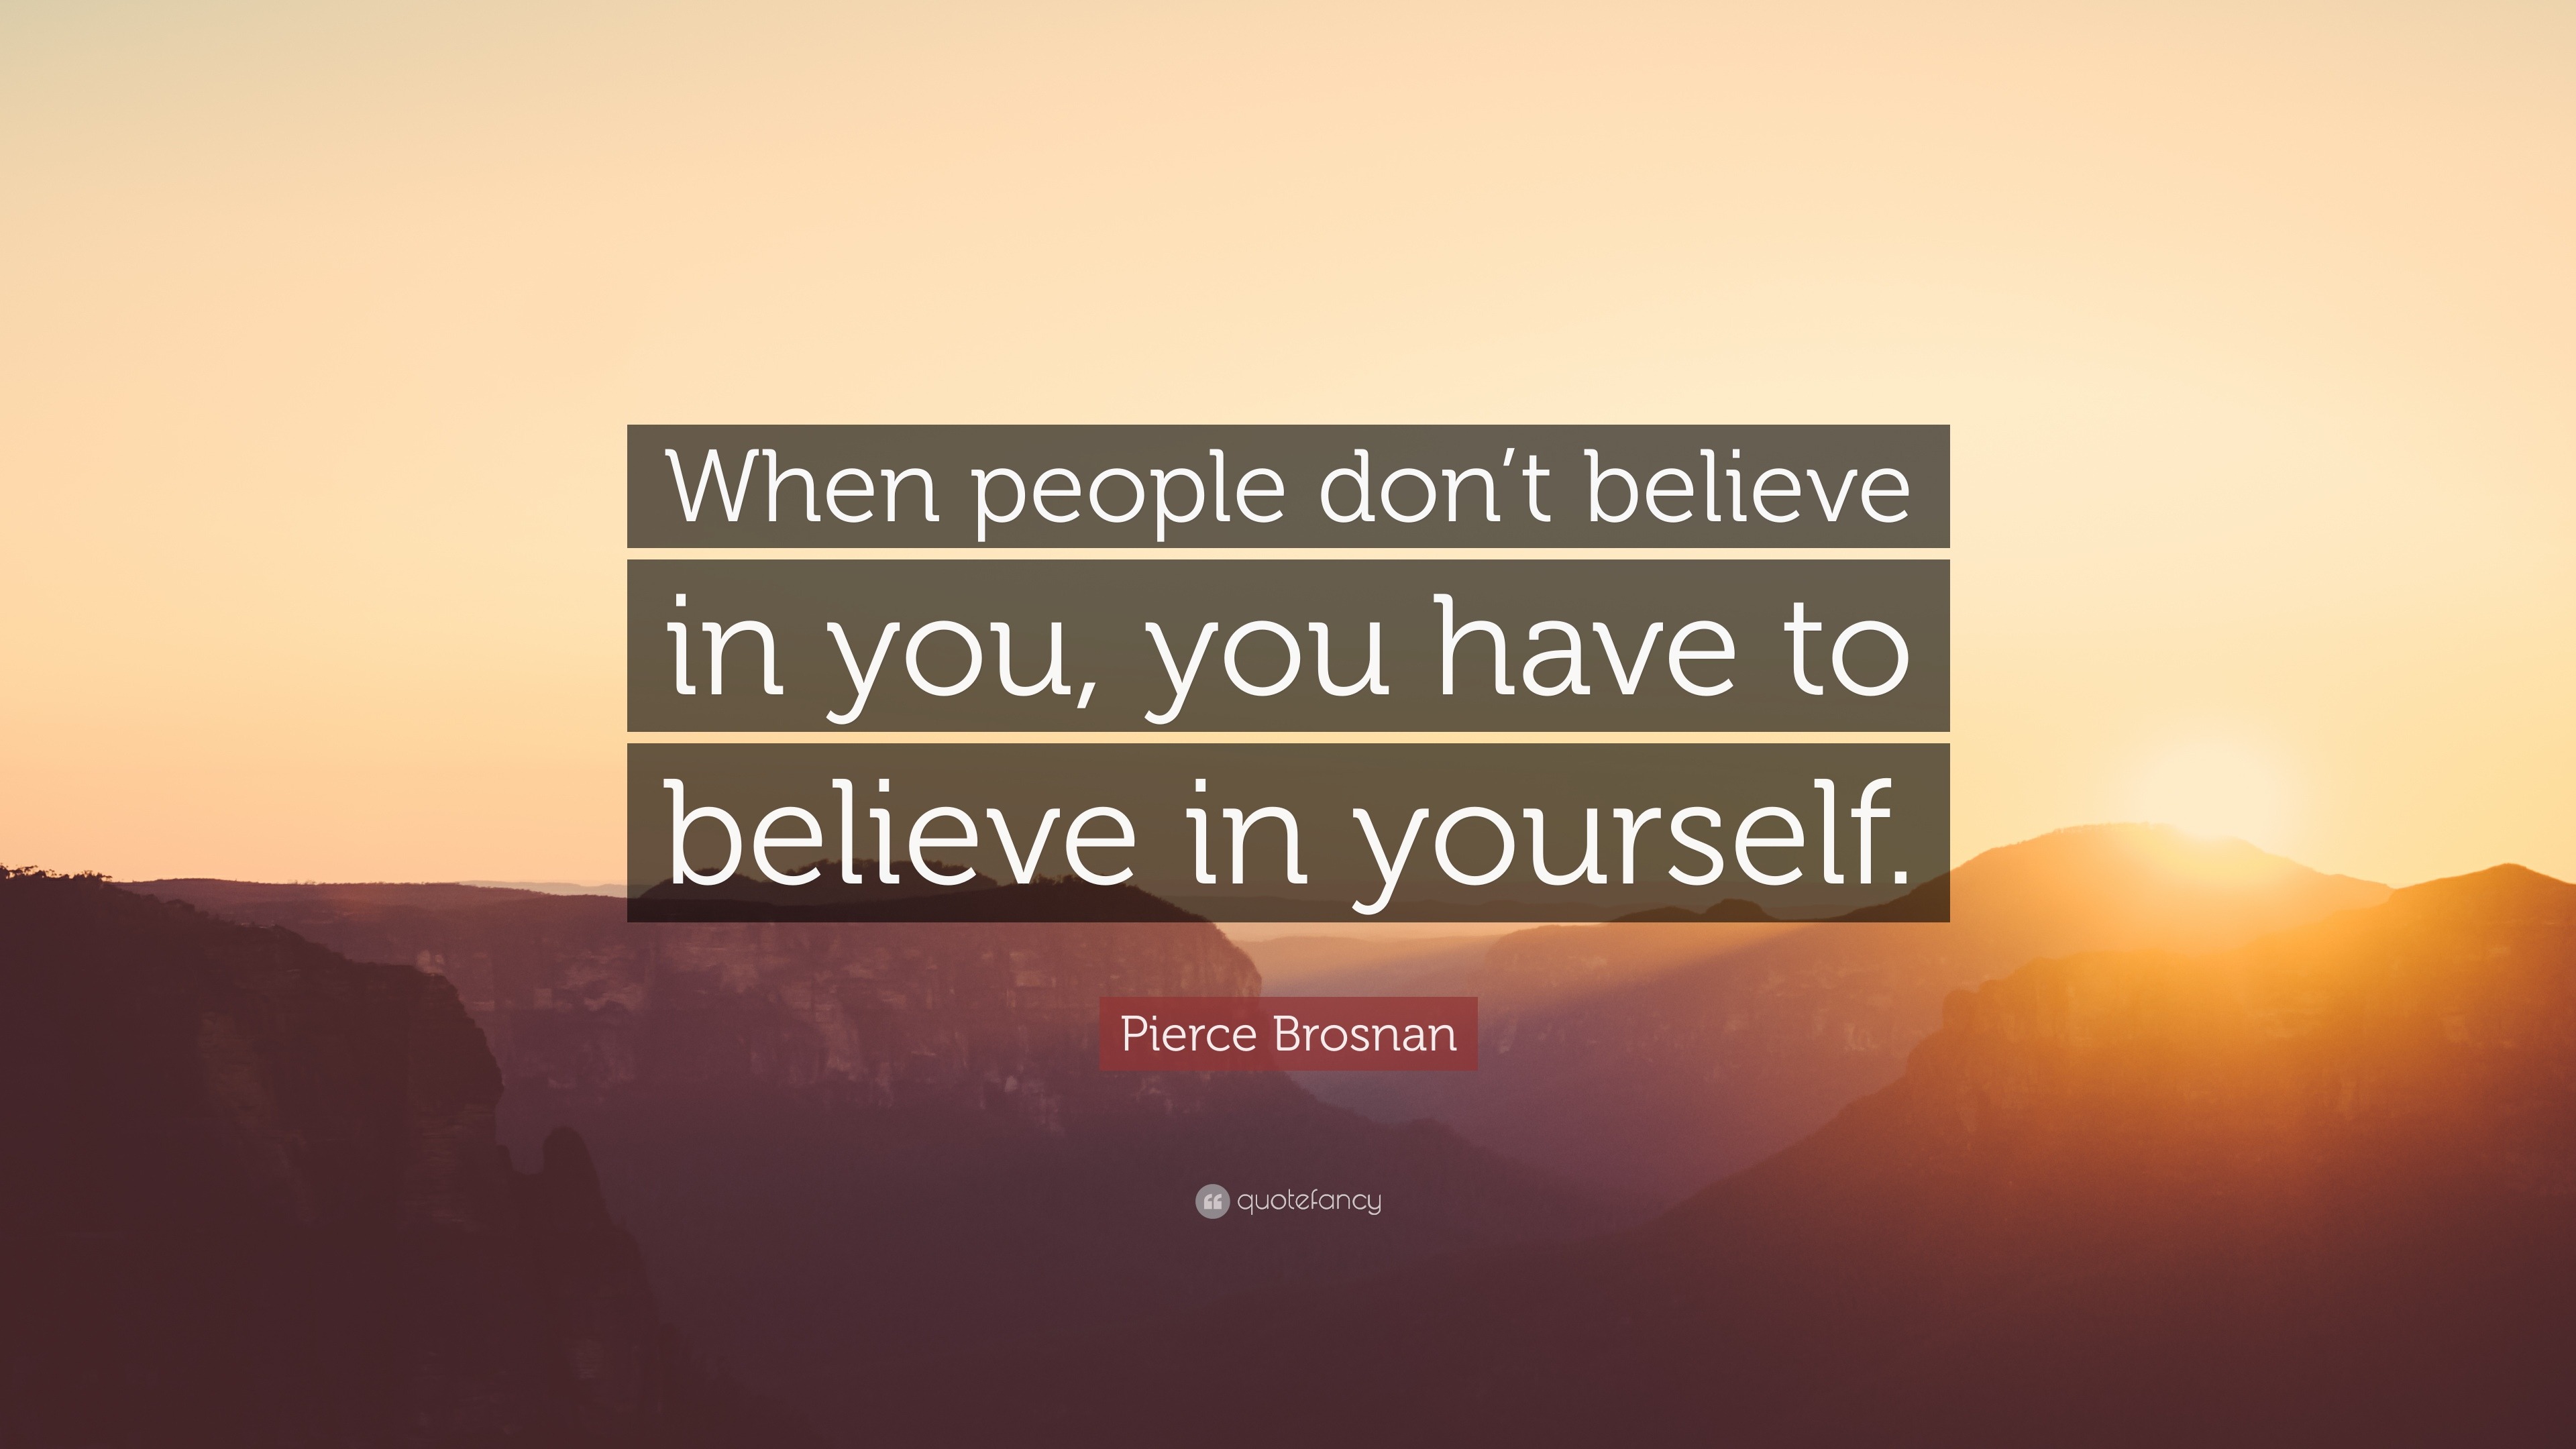 Pierce Brosnan Quote “When people don’t believe in you